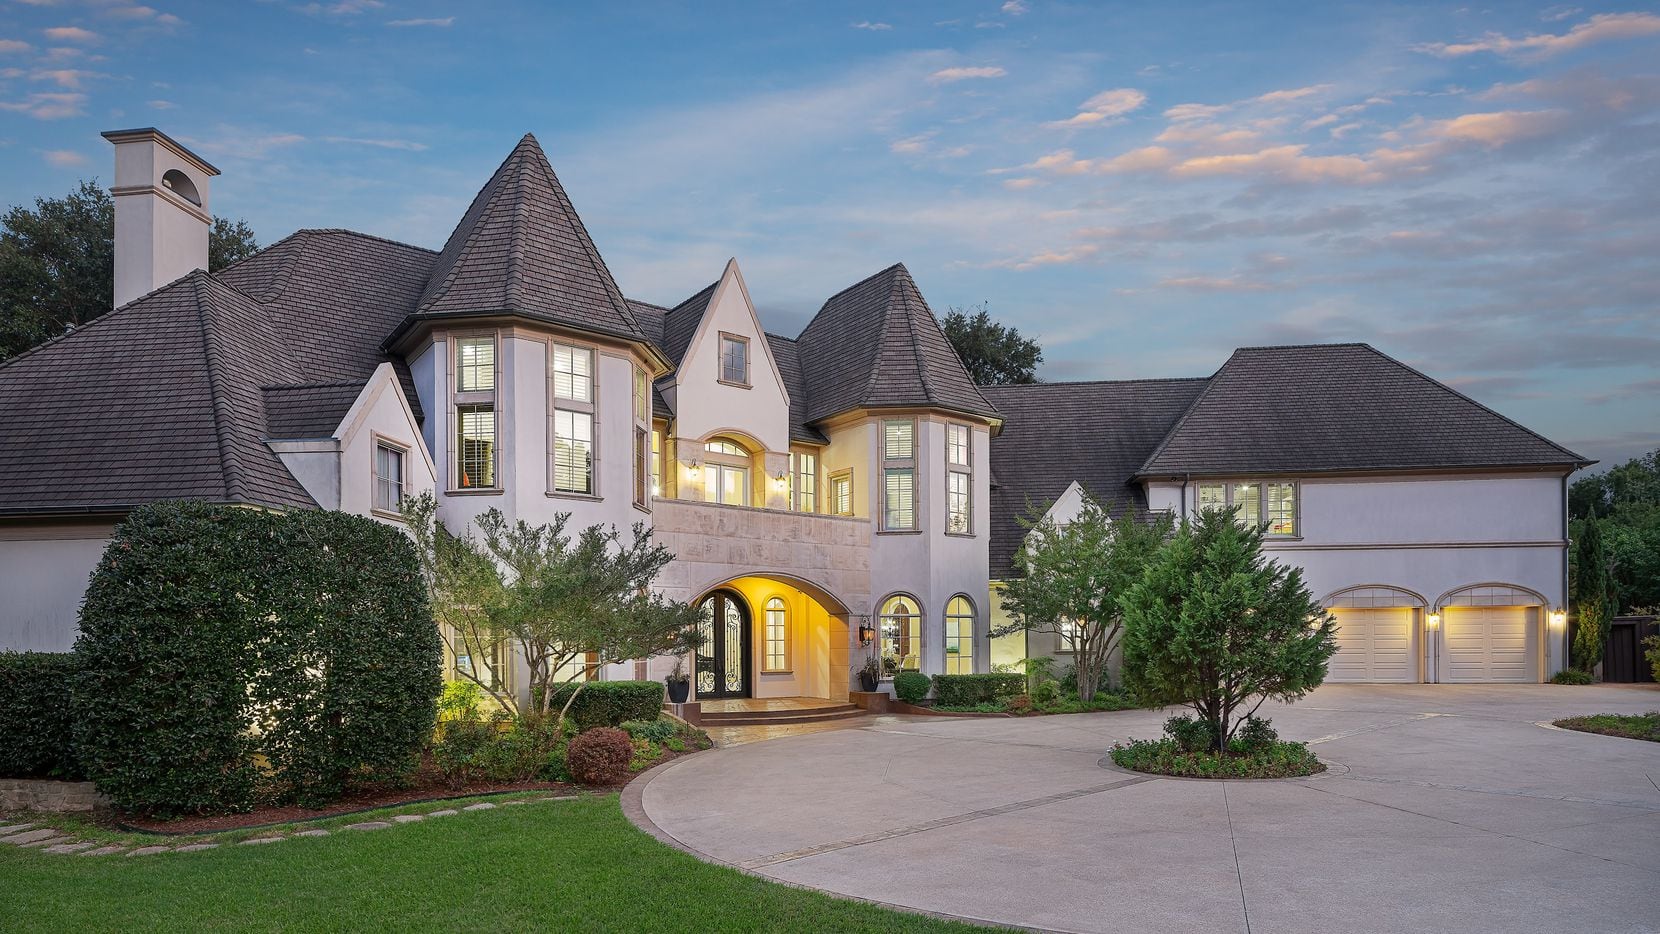 MultiBrief: More sellers than buyers for luxury homes